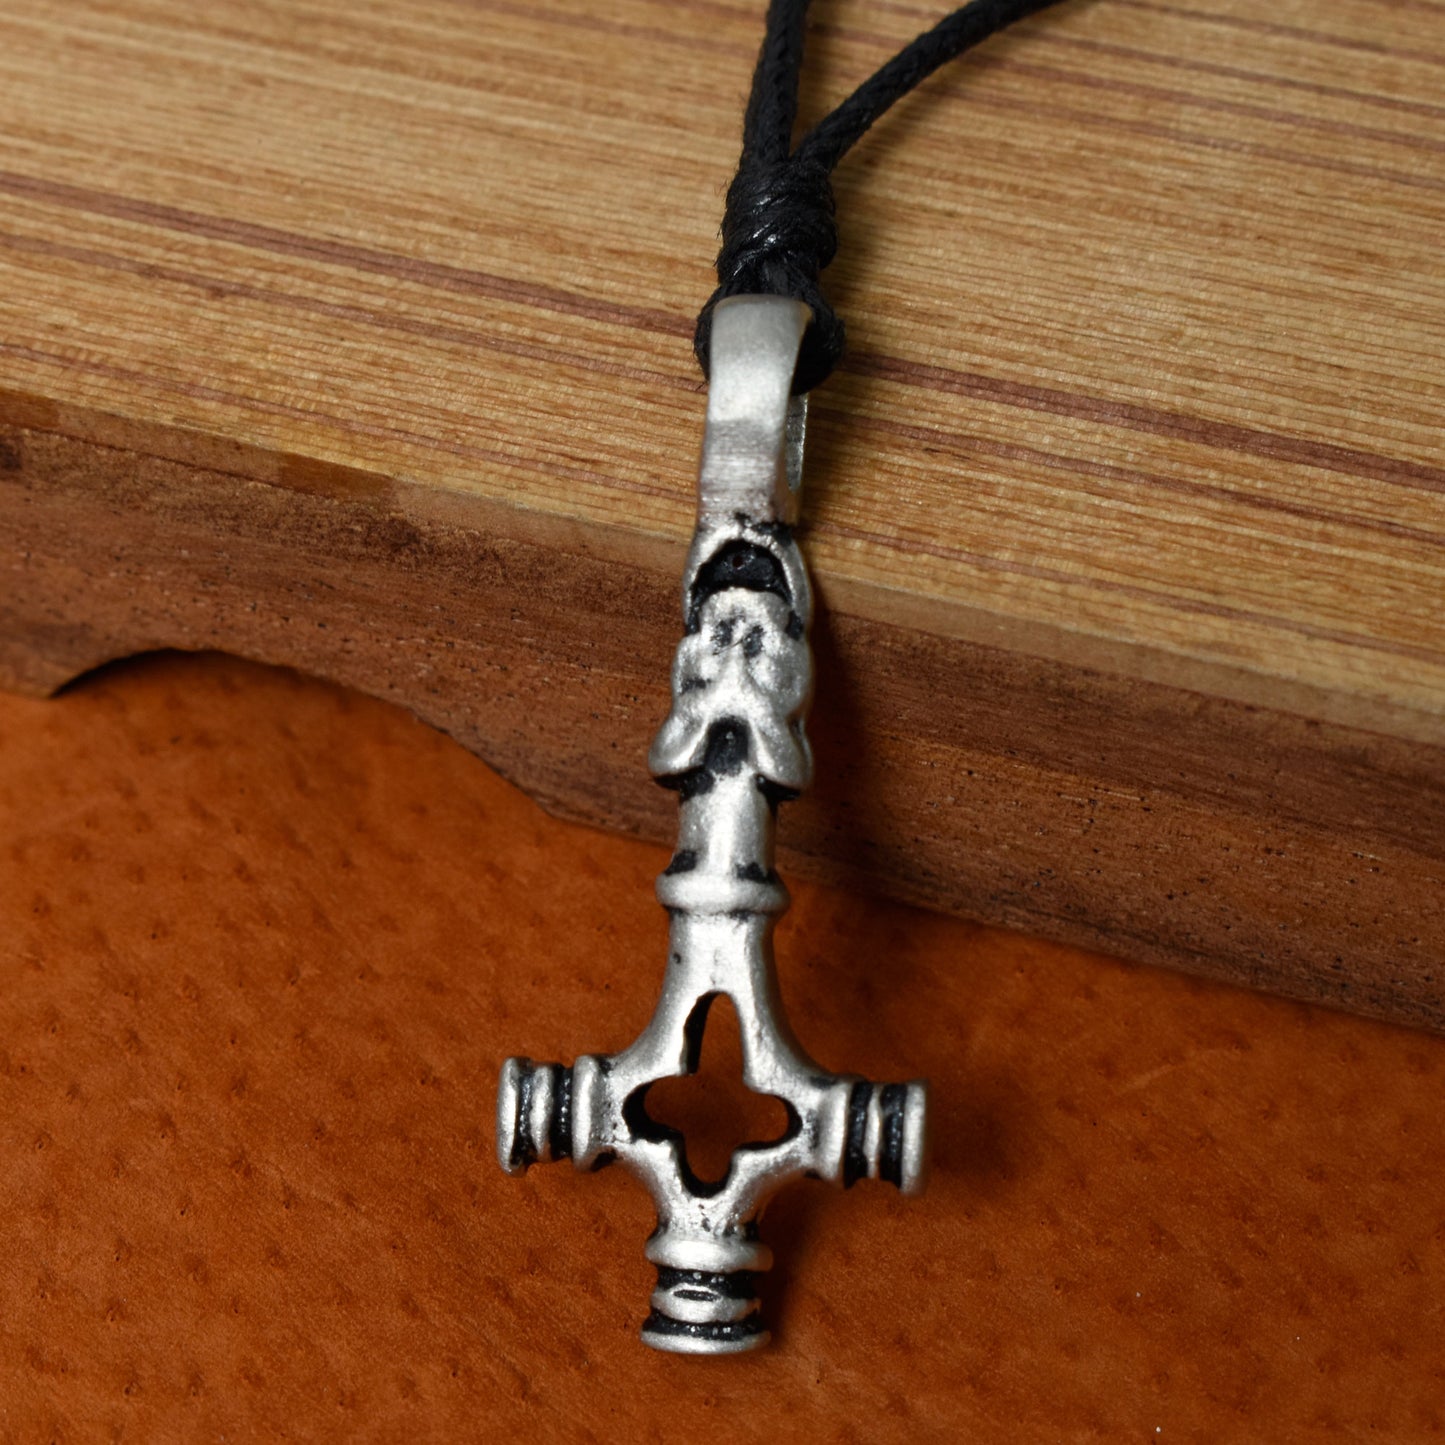 Lovely New Style Cross Silver Pewter Charm Necklace Pendant Jewelry With Cotton Cord